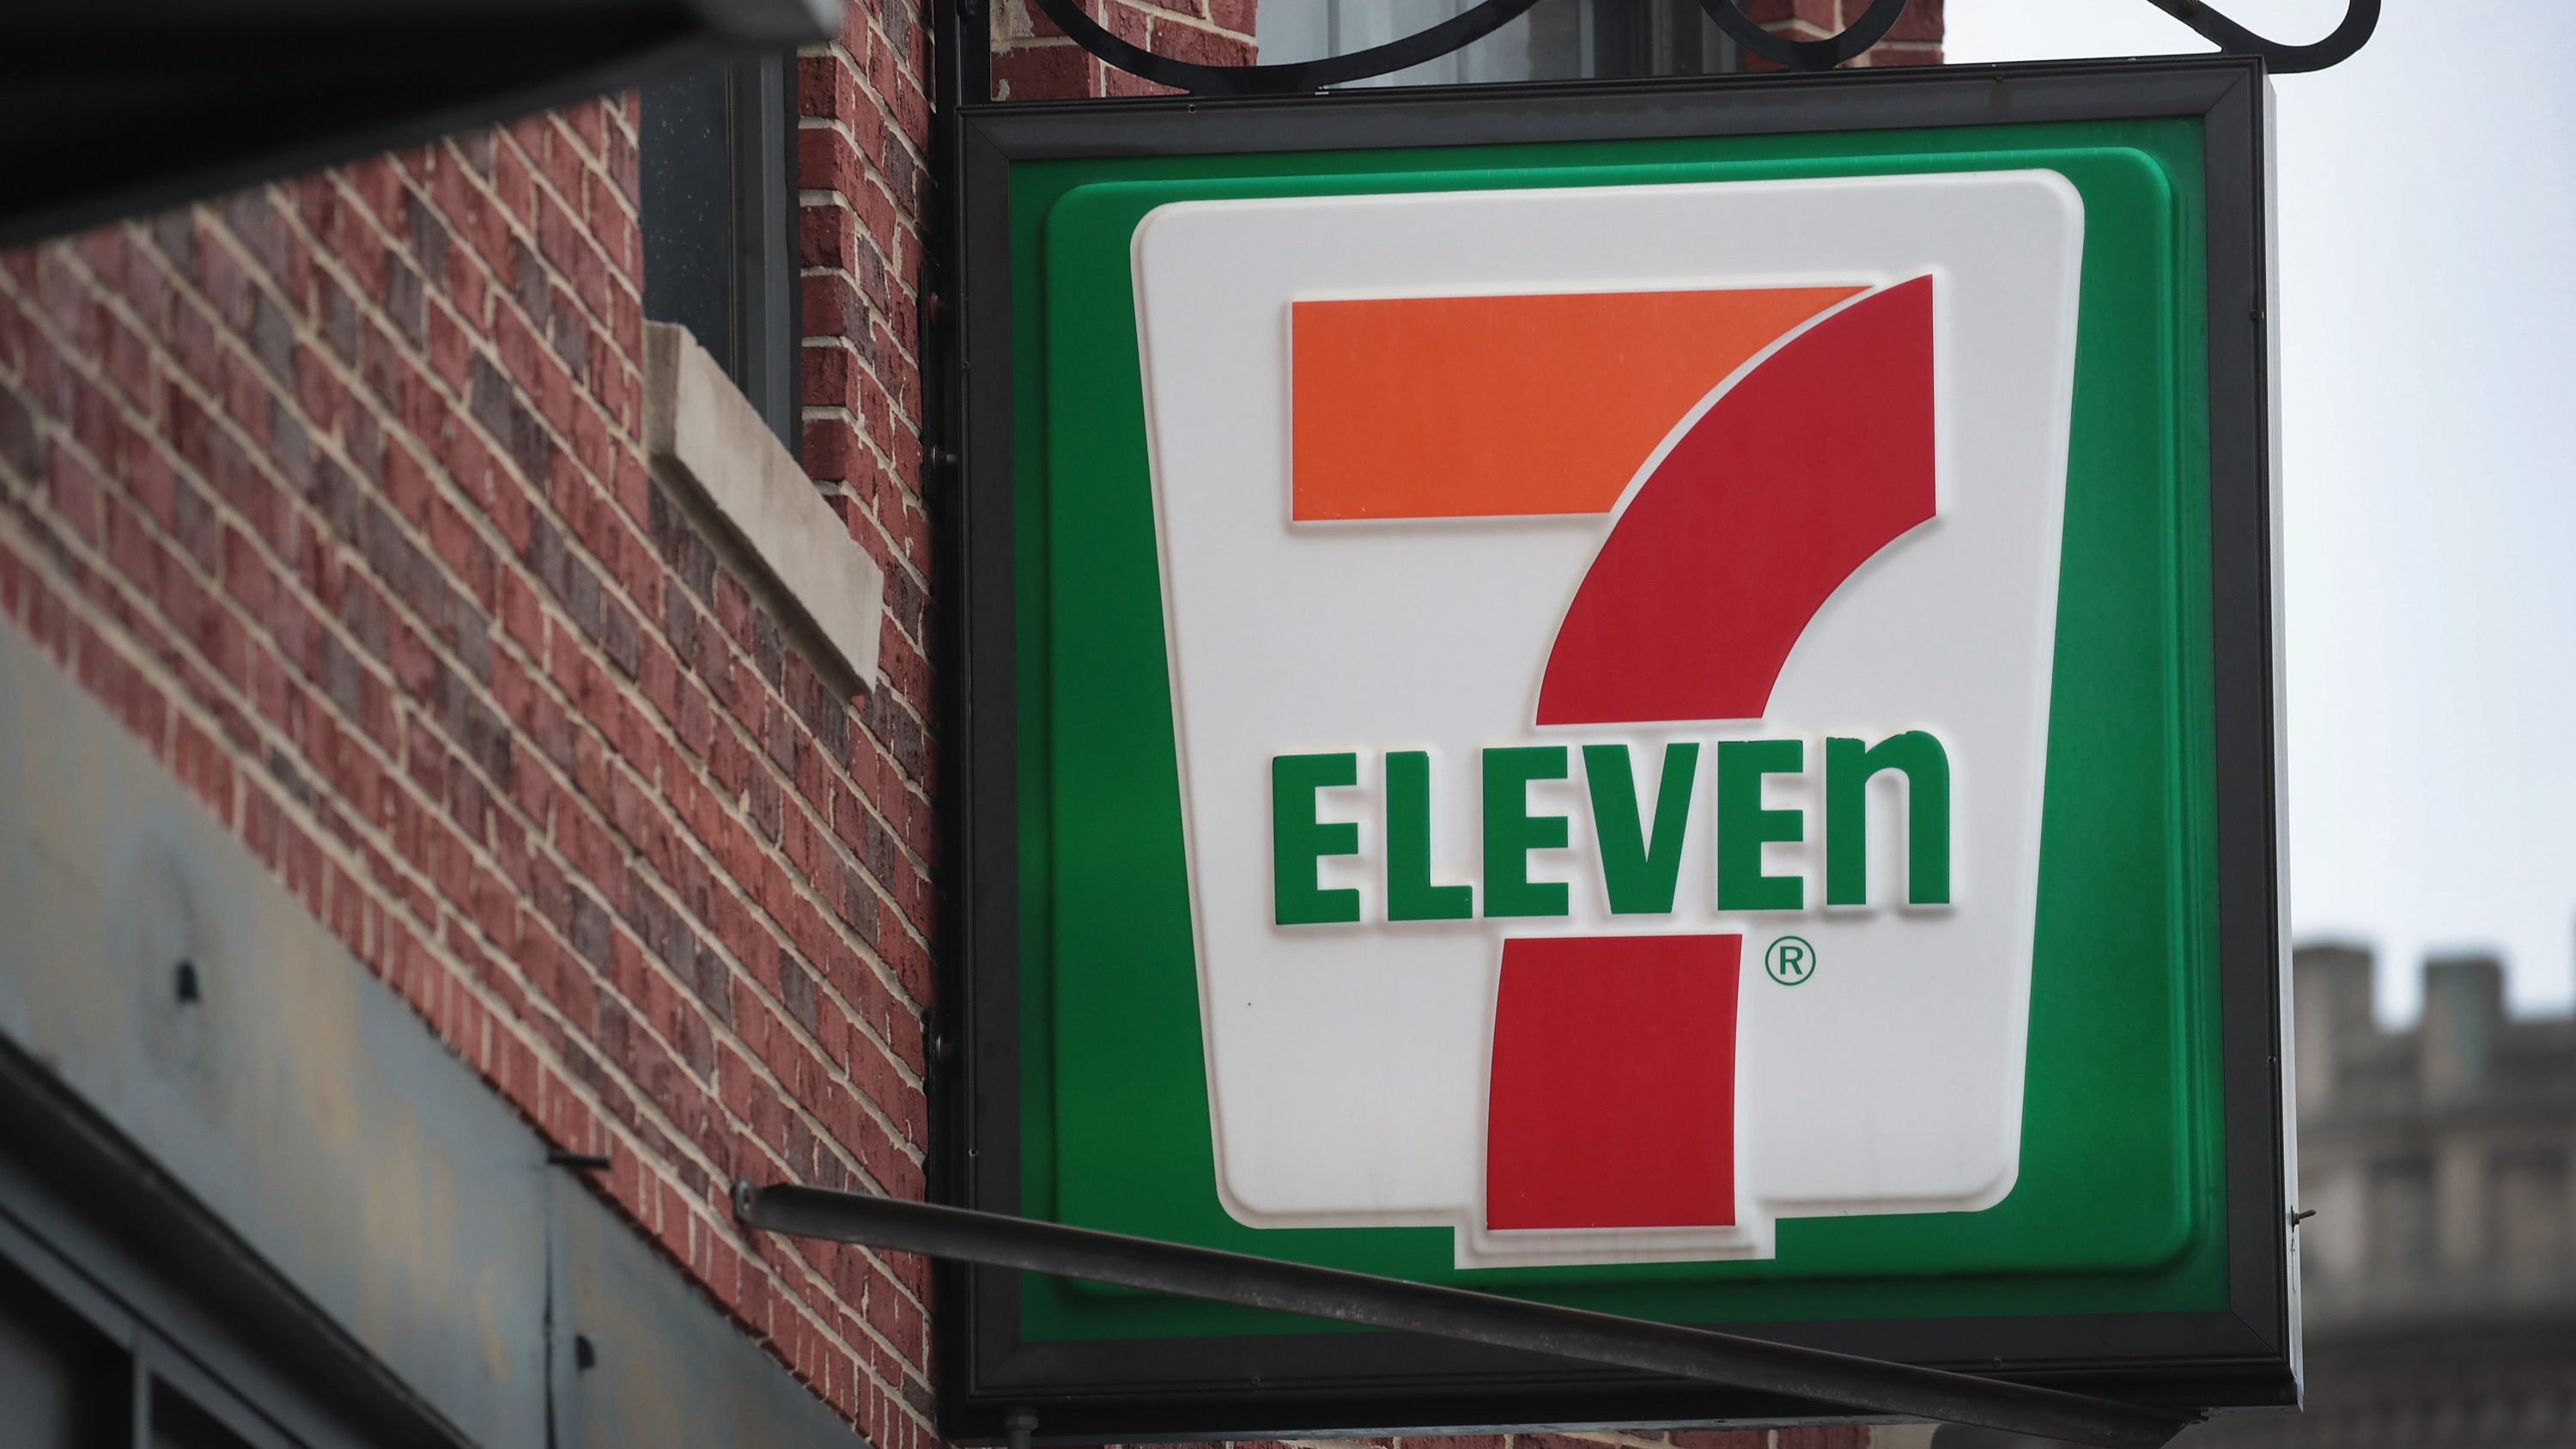 Agents From Immigration And Customs Enforcement Agency Target About 100 7-Eleven Stores In Employment Of Undocumented Raids